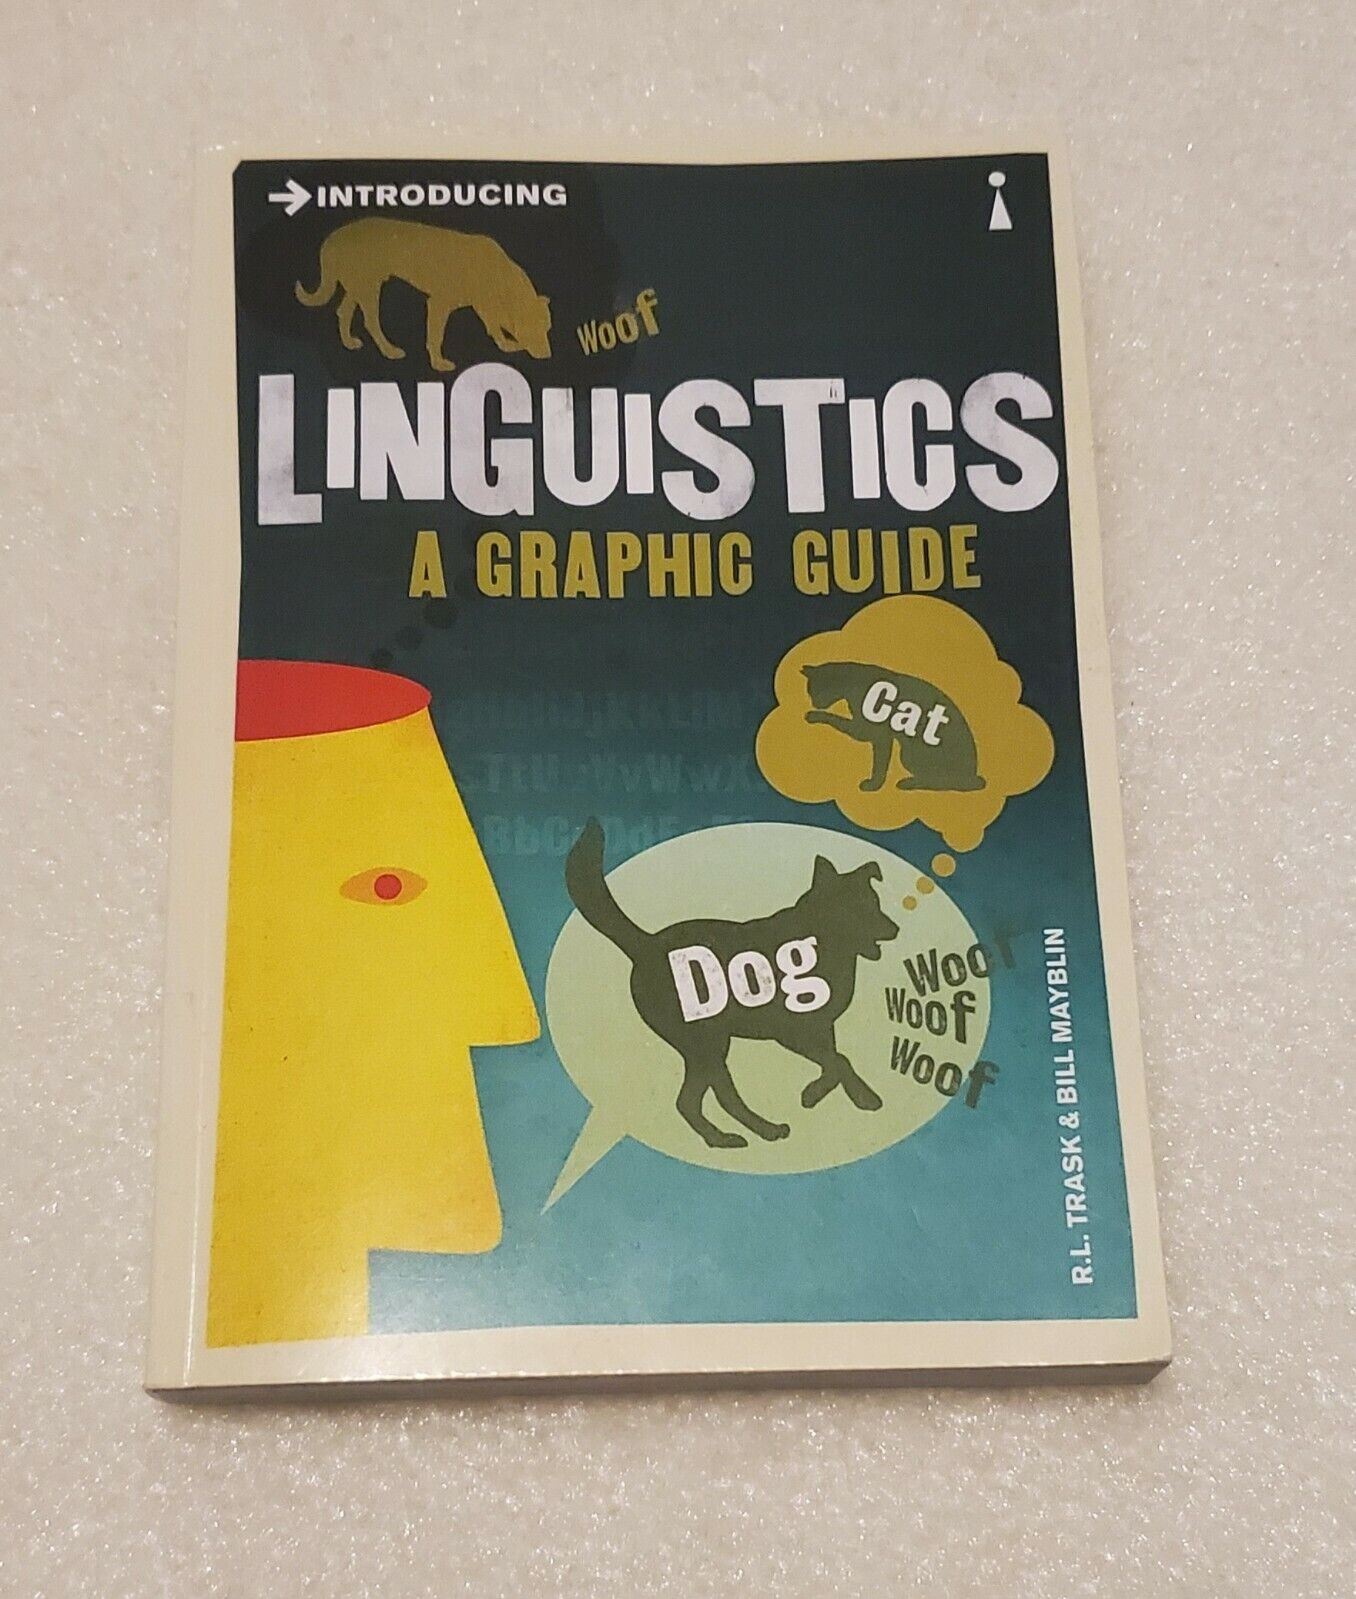 Linguistics A Graphic Guide by R.L. Trask and Bill Mayblin 2012